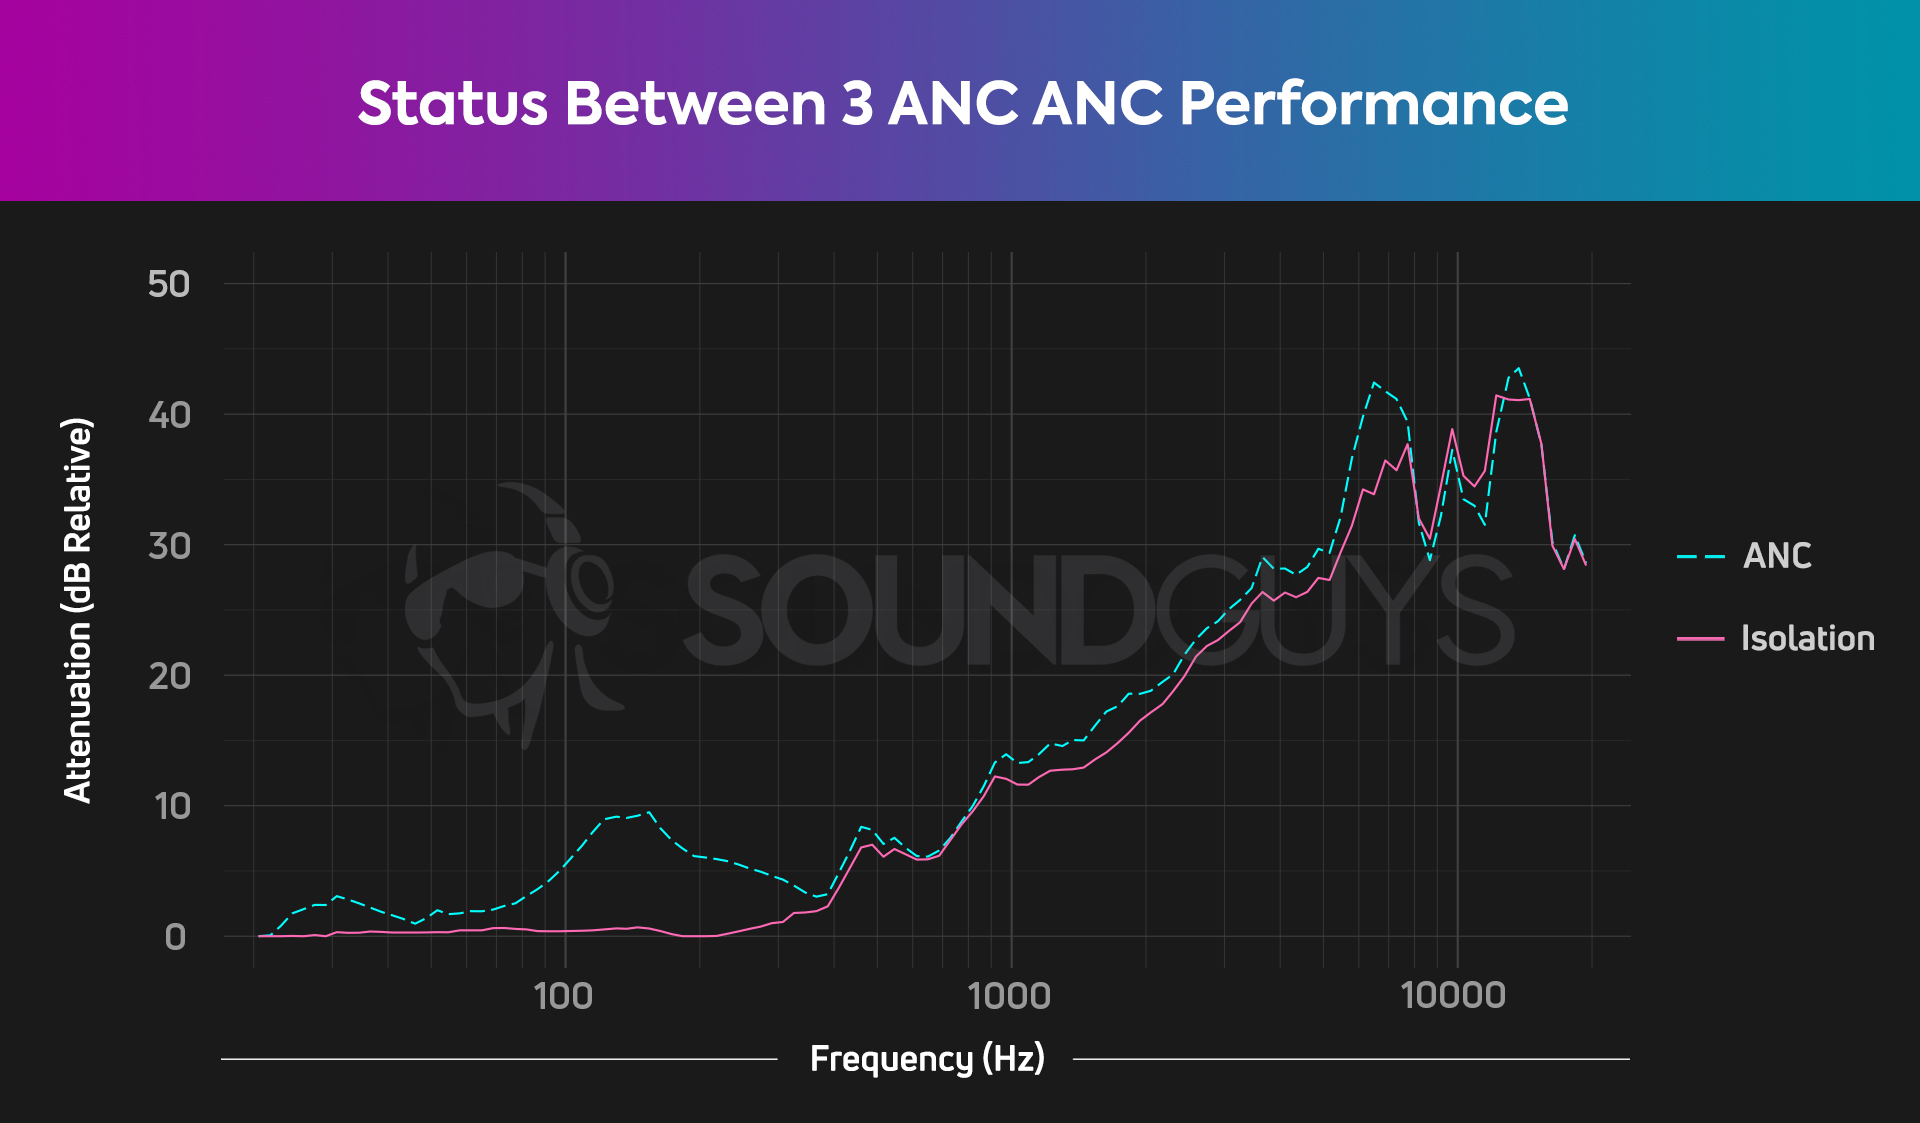 The isolation and ANC performance of the Status Between 3 ANC shown on a chart.